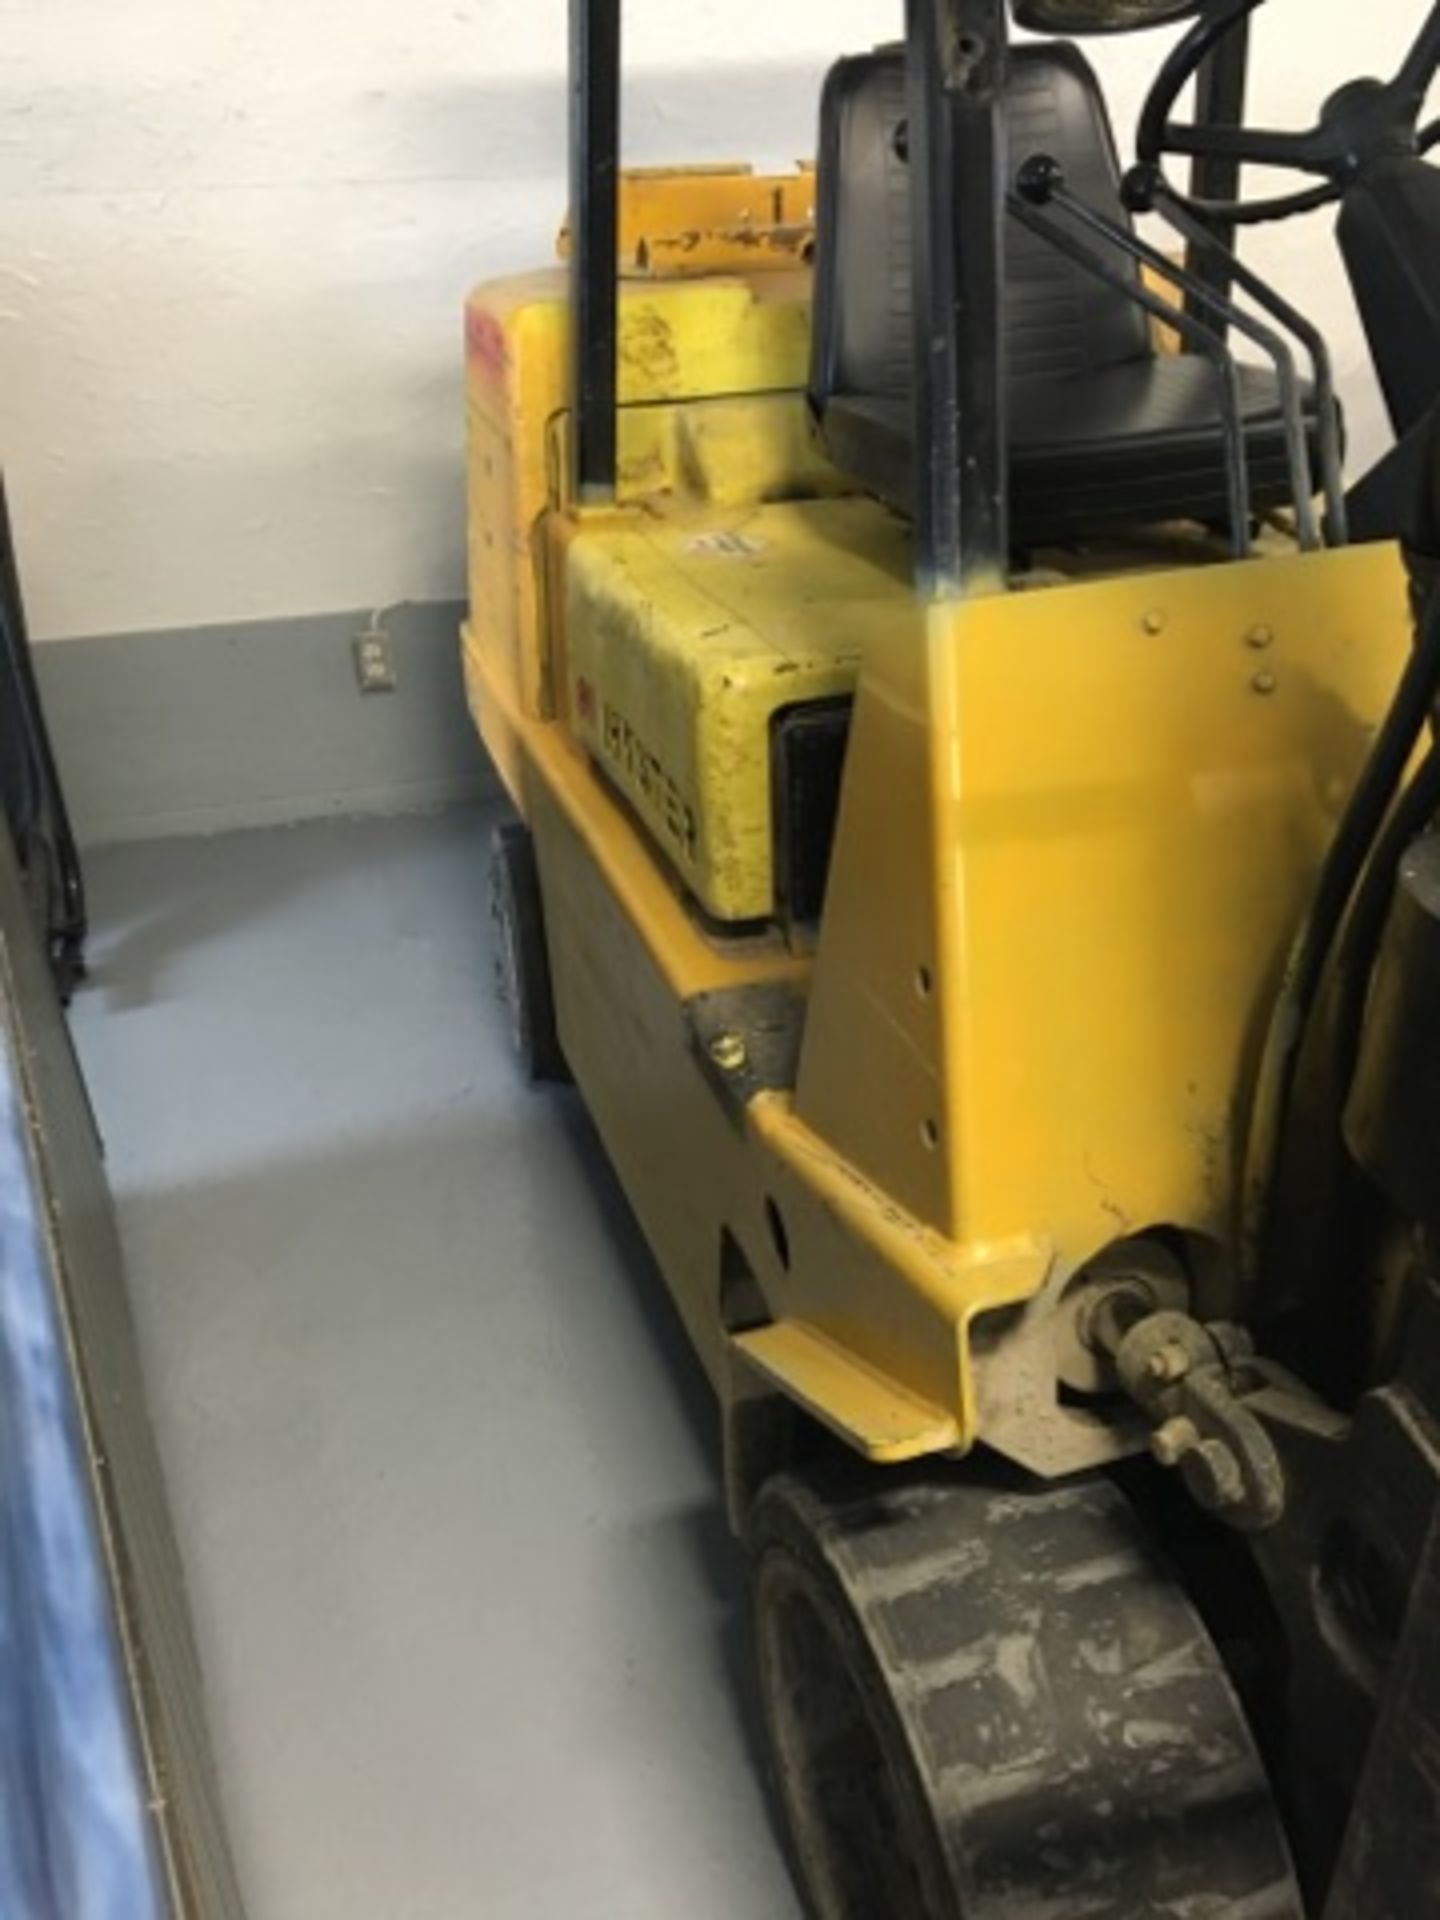 HYSTER PROPANE LIFT TRUCK, 8,000 LBS CAP. SIDE-SHIFT, HARD TIRES, 172'' HEIGHT, C/W EXTENSION FORKS - Image 3 of 7